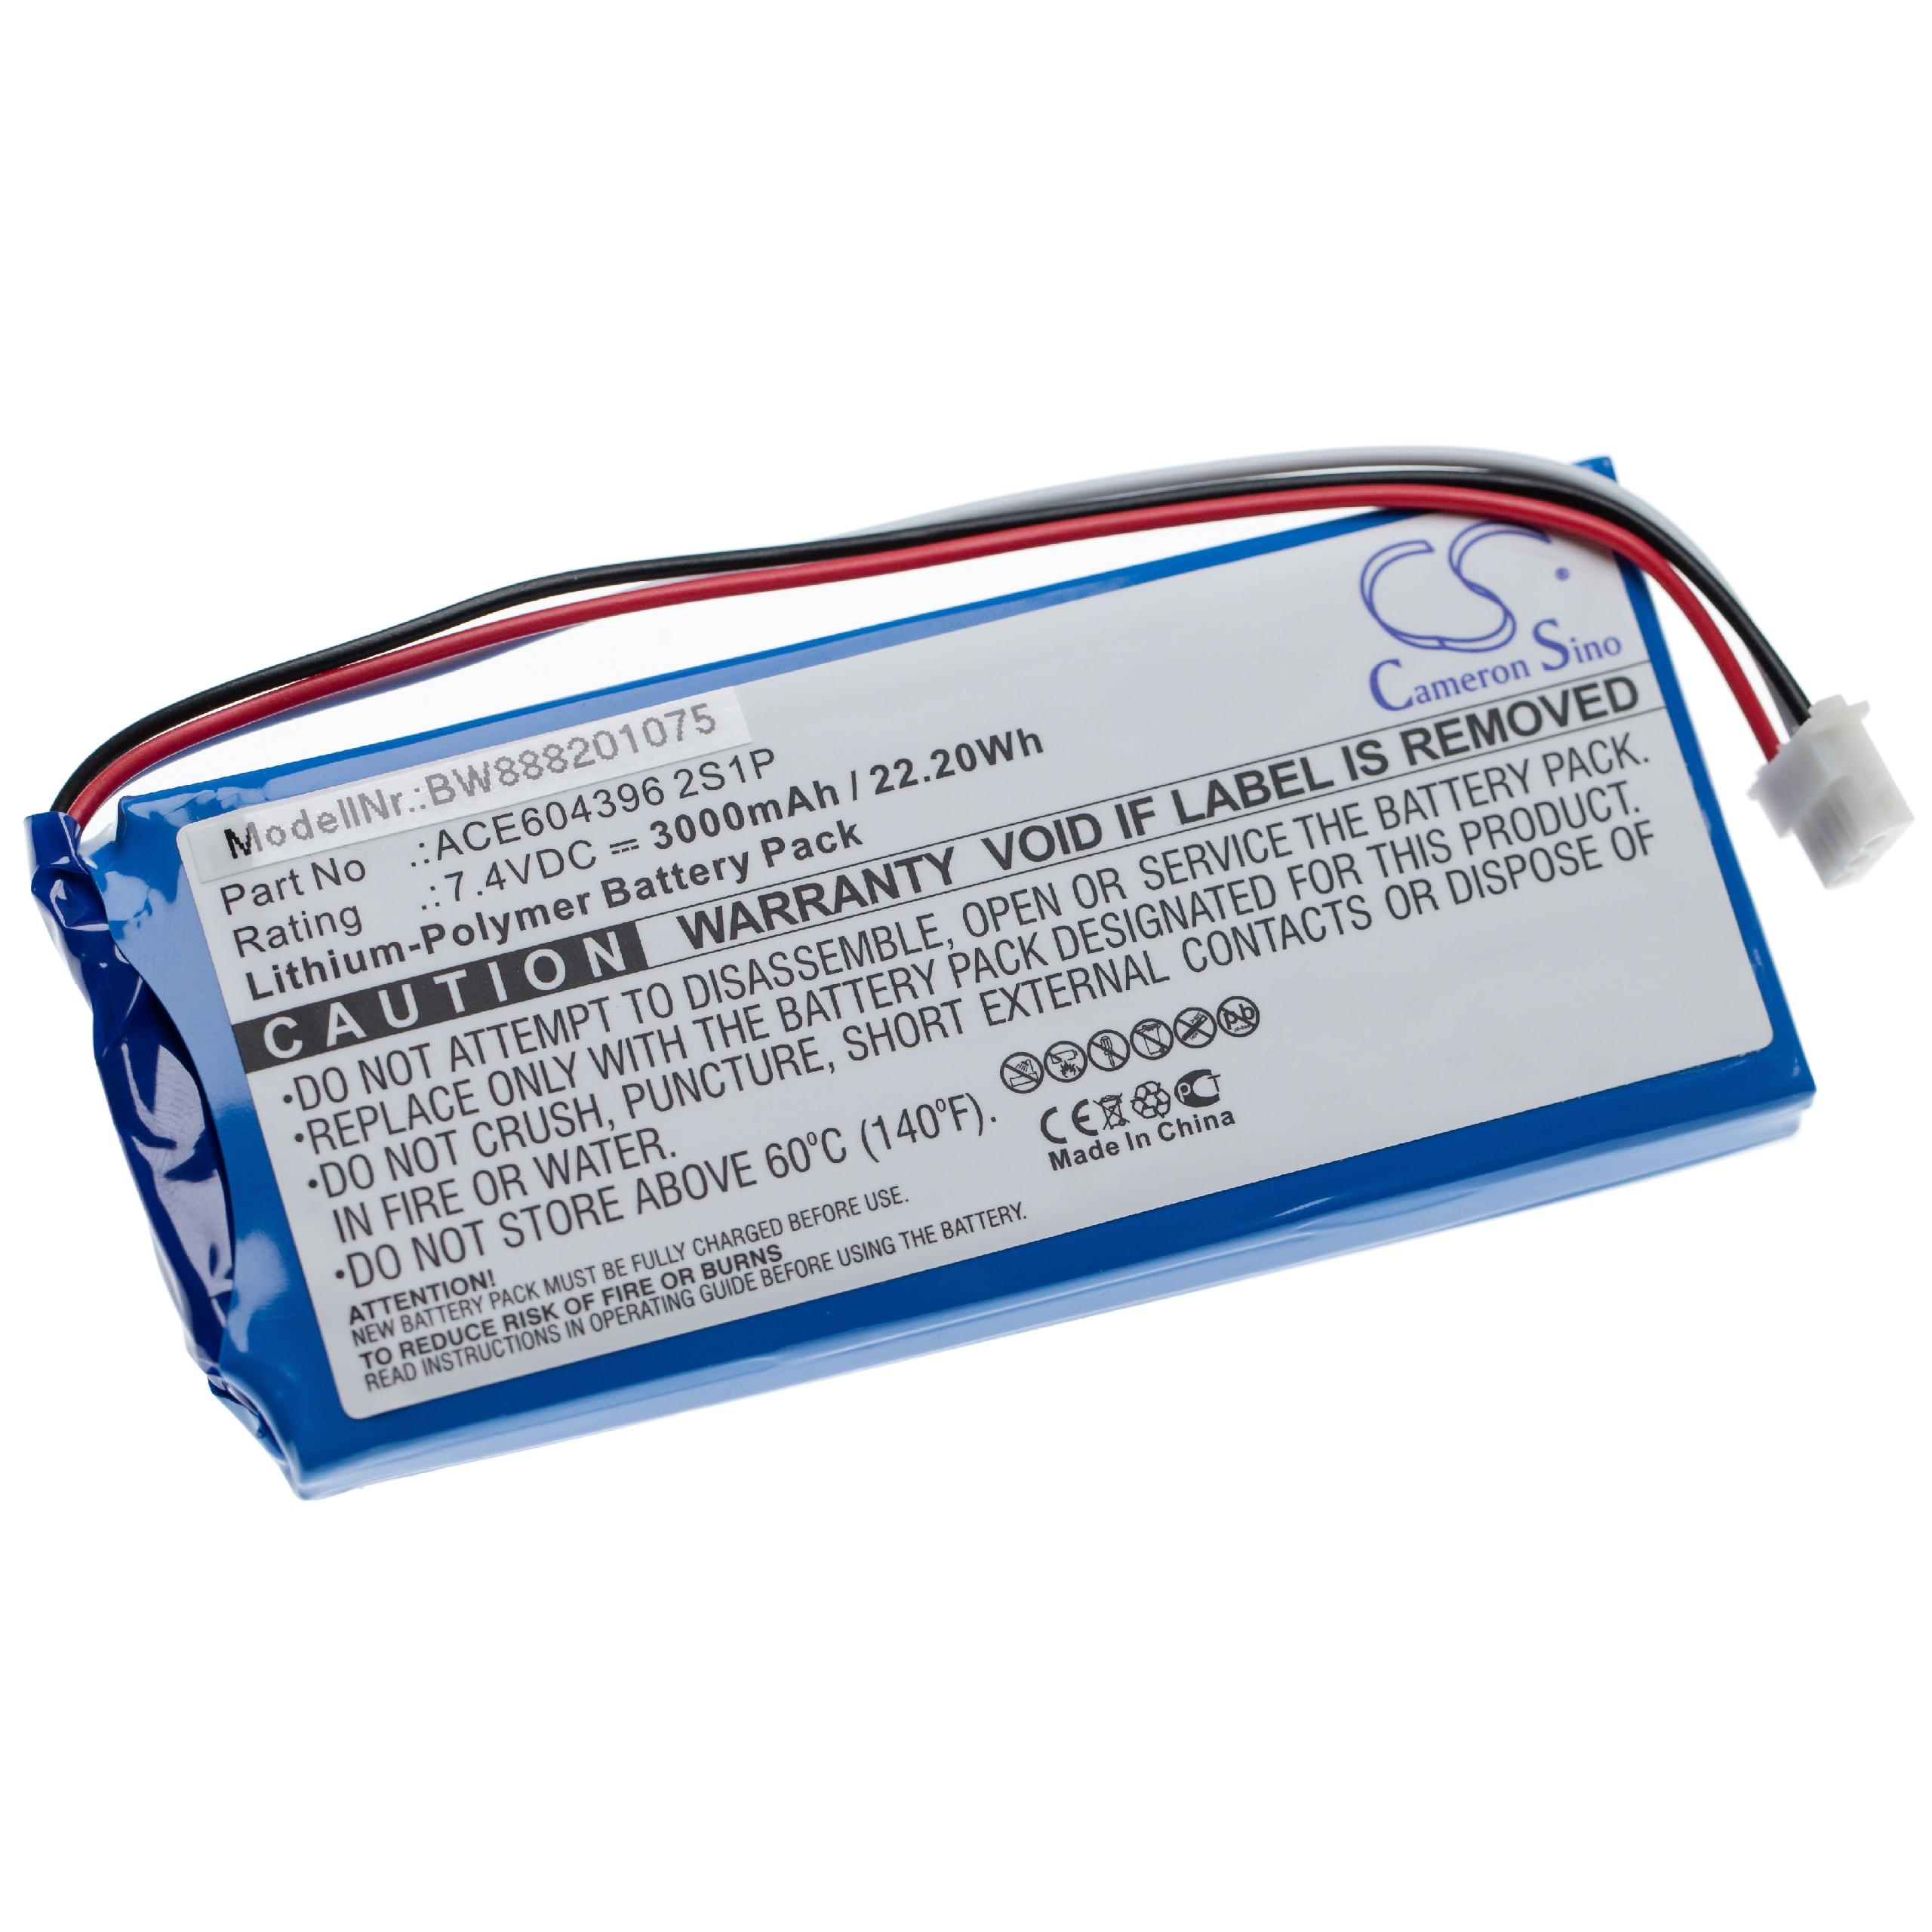 Laser Battery Replacement for Aaronia E-0205, ACE604396 2S1P - 3000mAh 7.4V Li-polymer